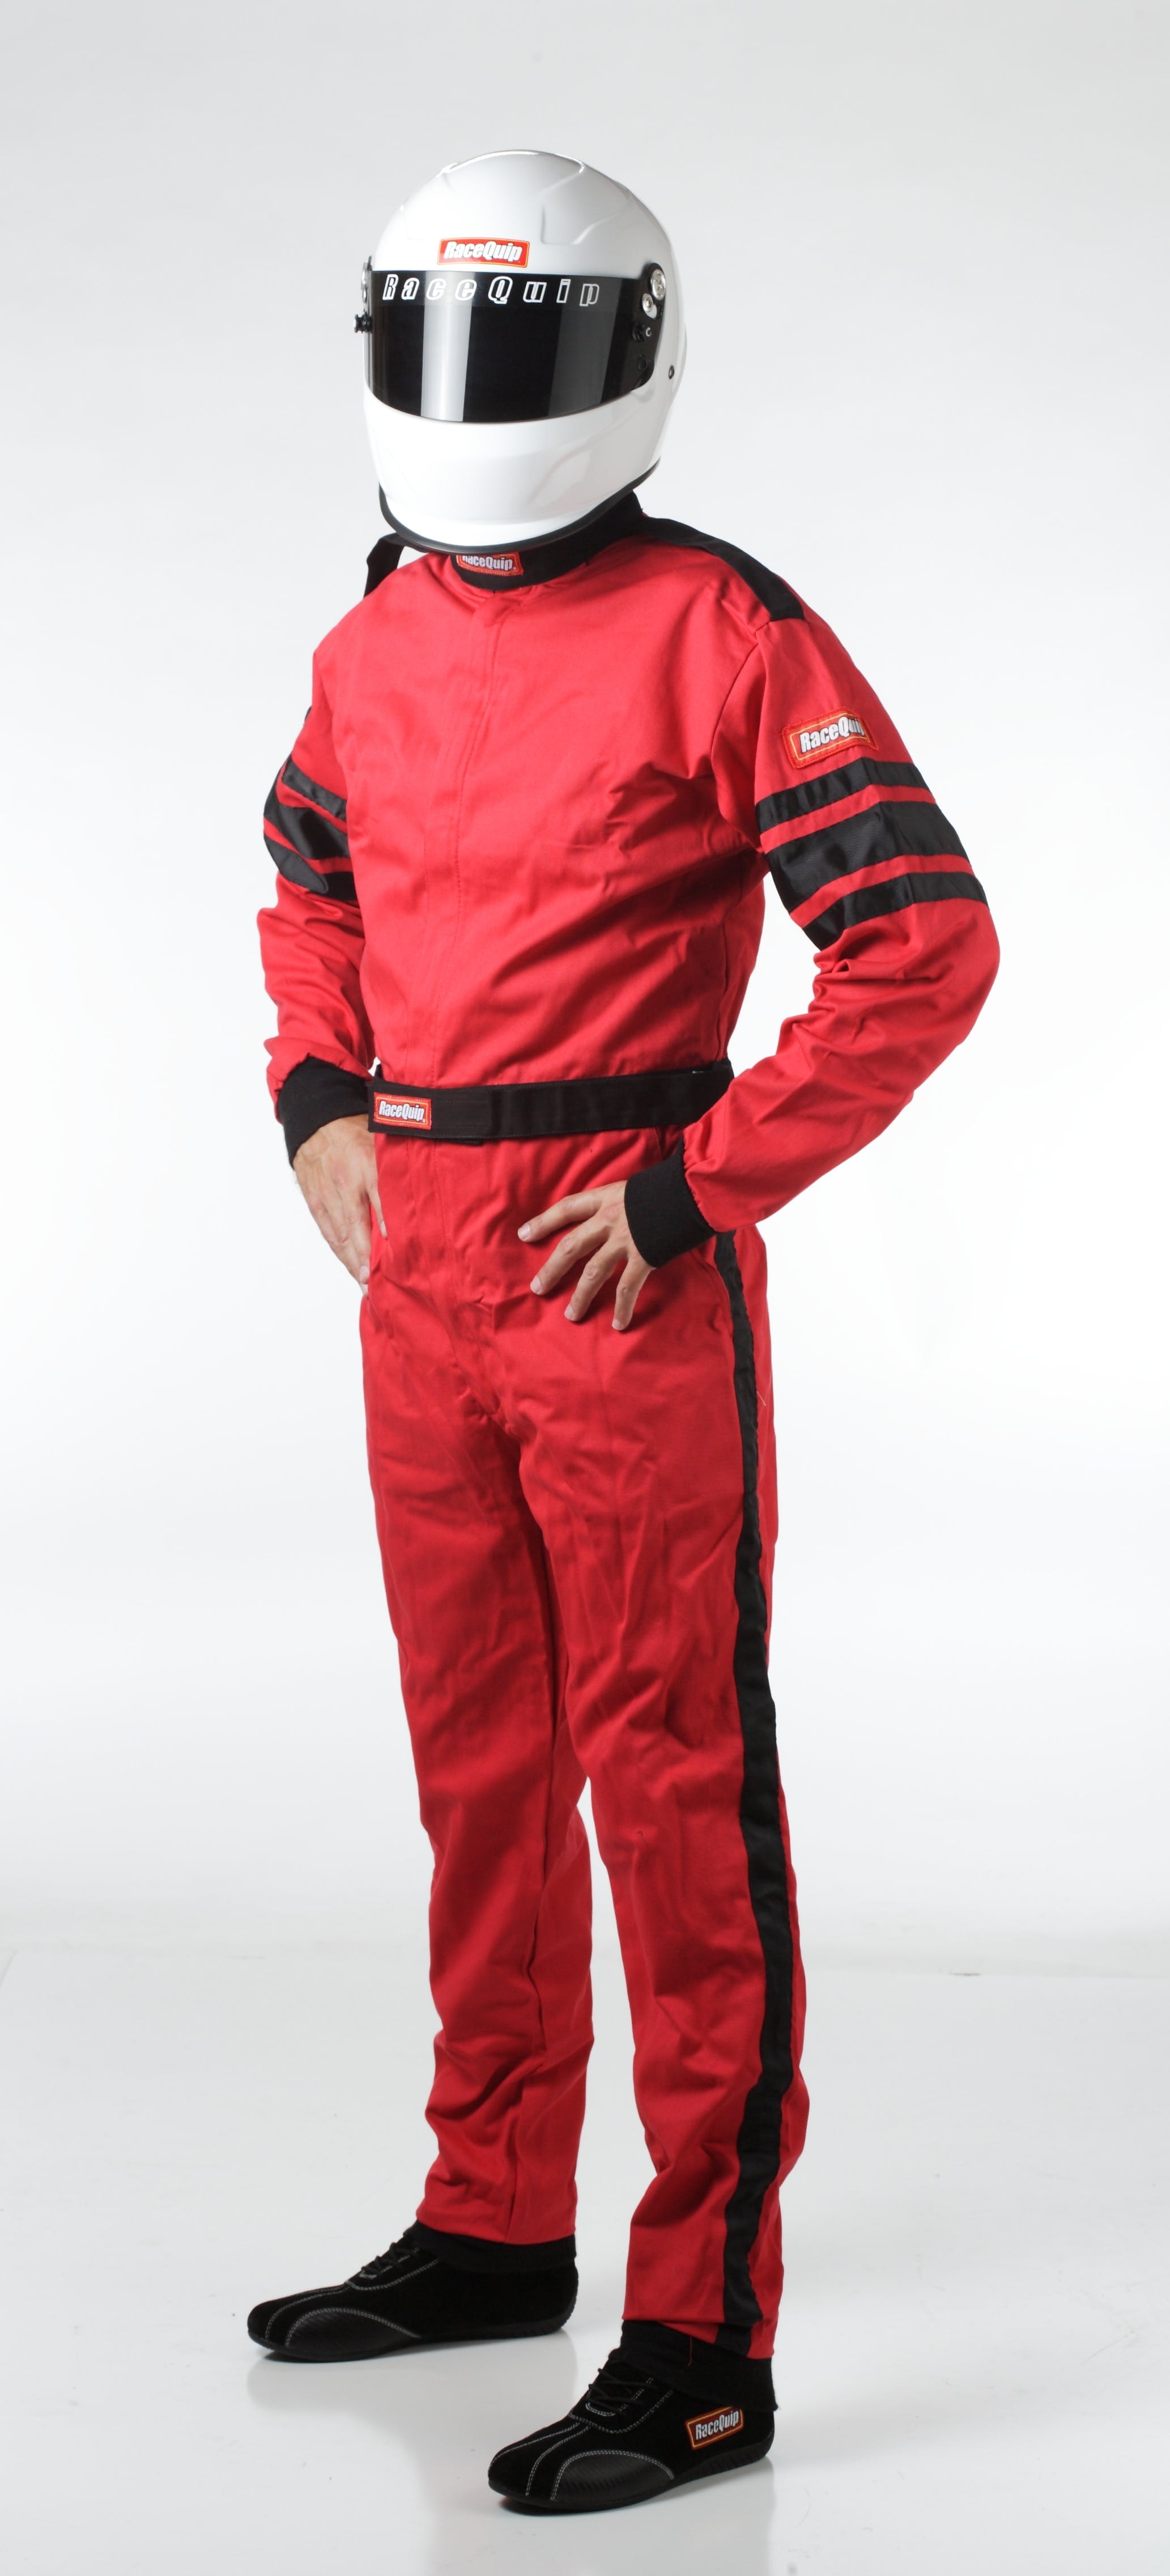 RaceQuip 110012 SFI-1 Pyrovatex One-Piece Single-Layer Racing Fire Suit (Red, Small)